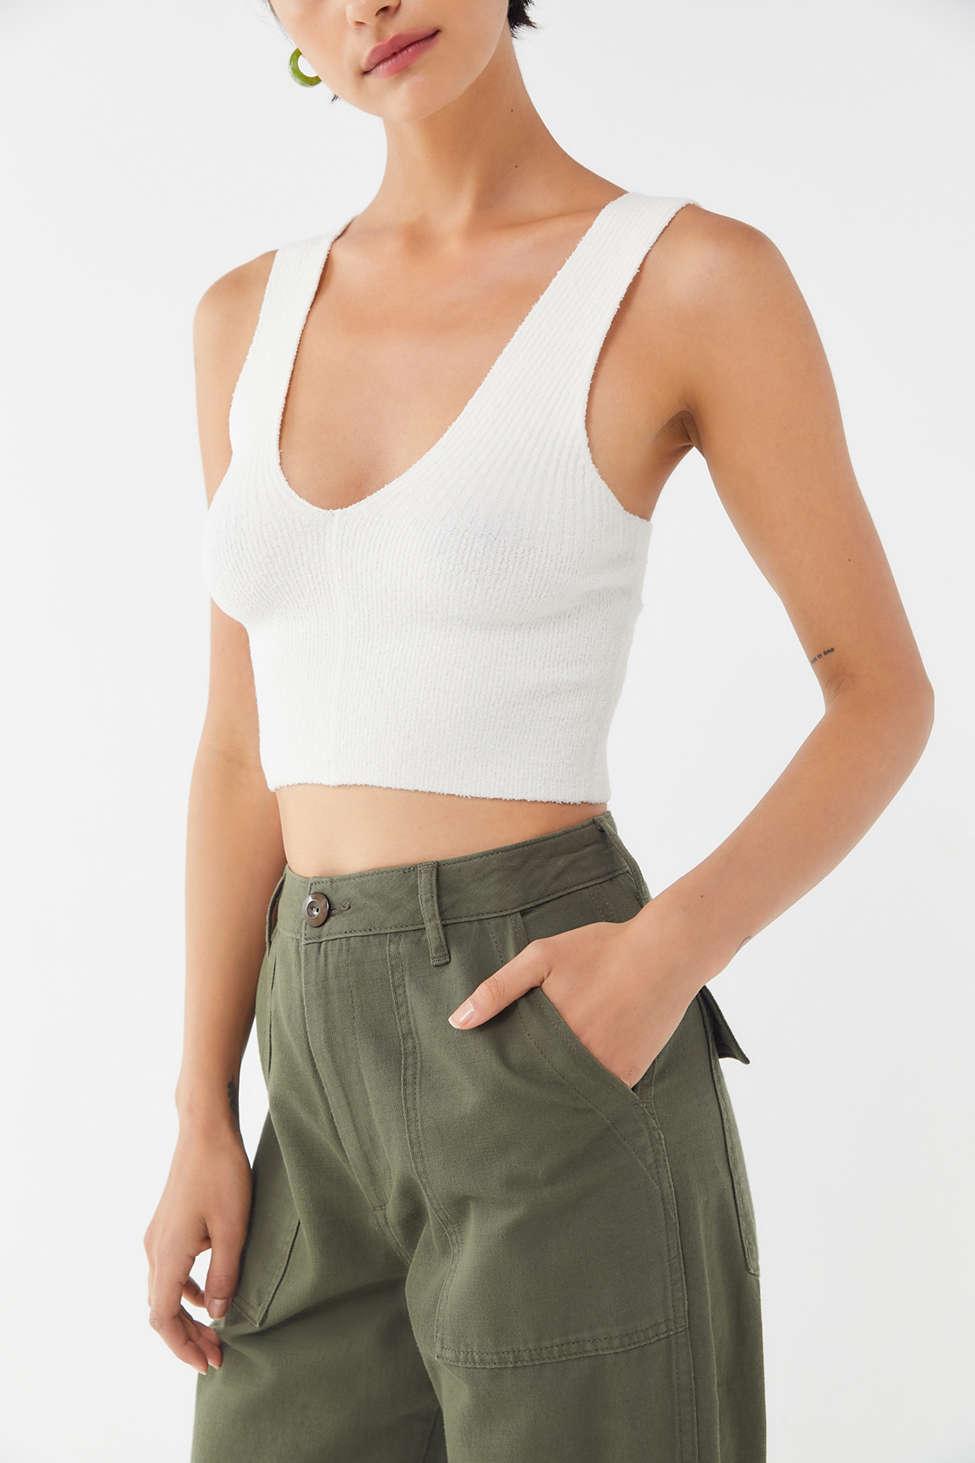 Urban Outfitters, Tops